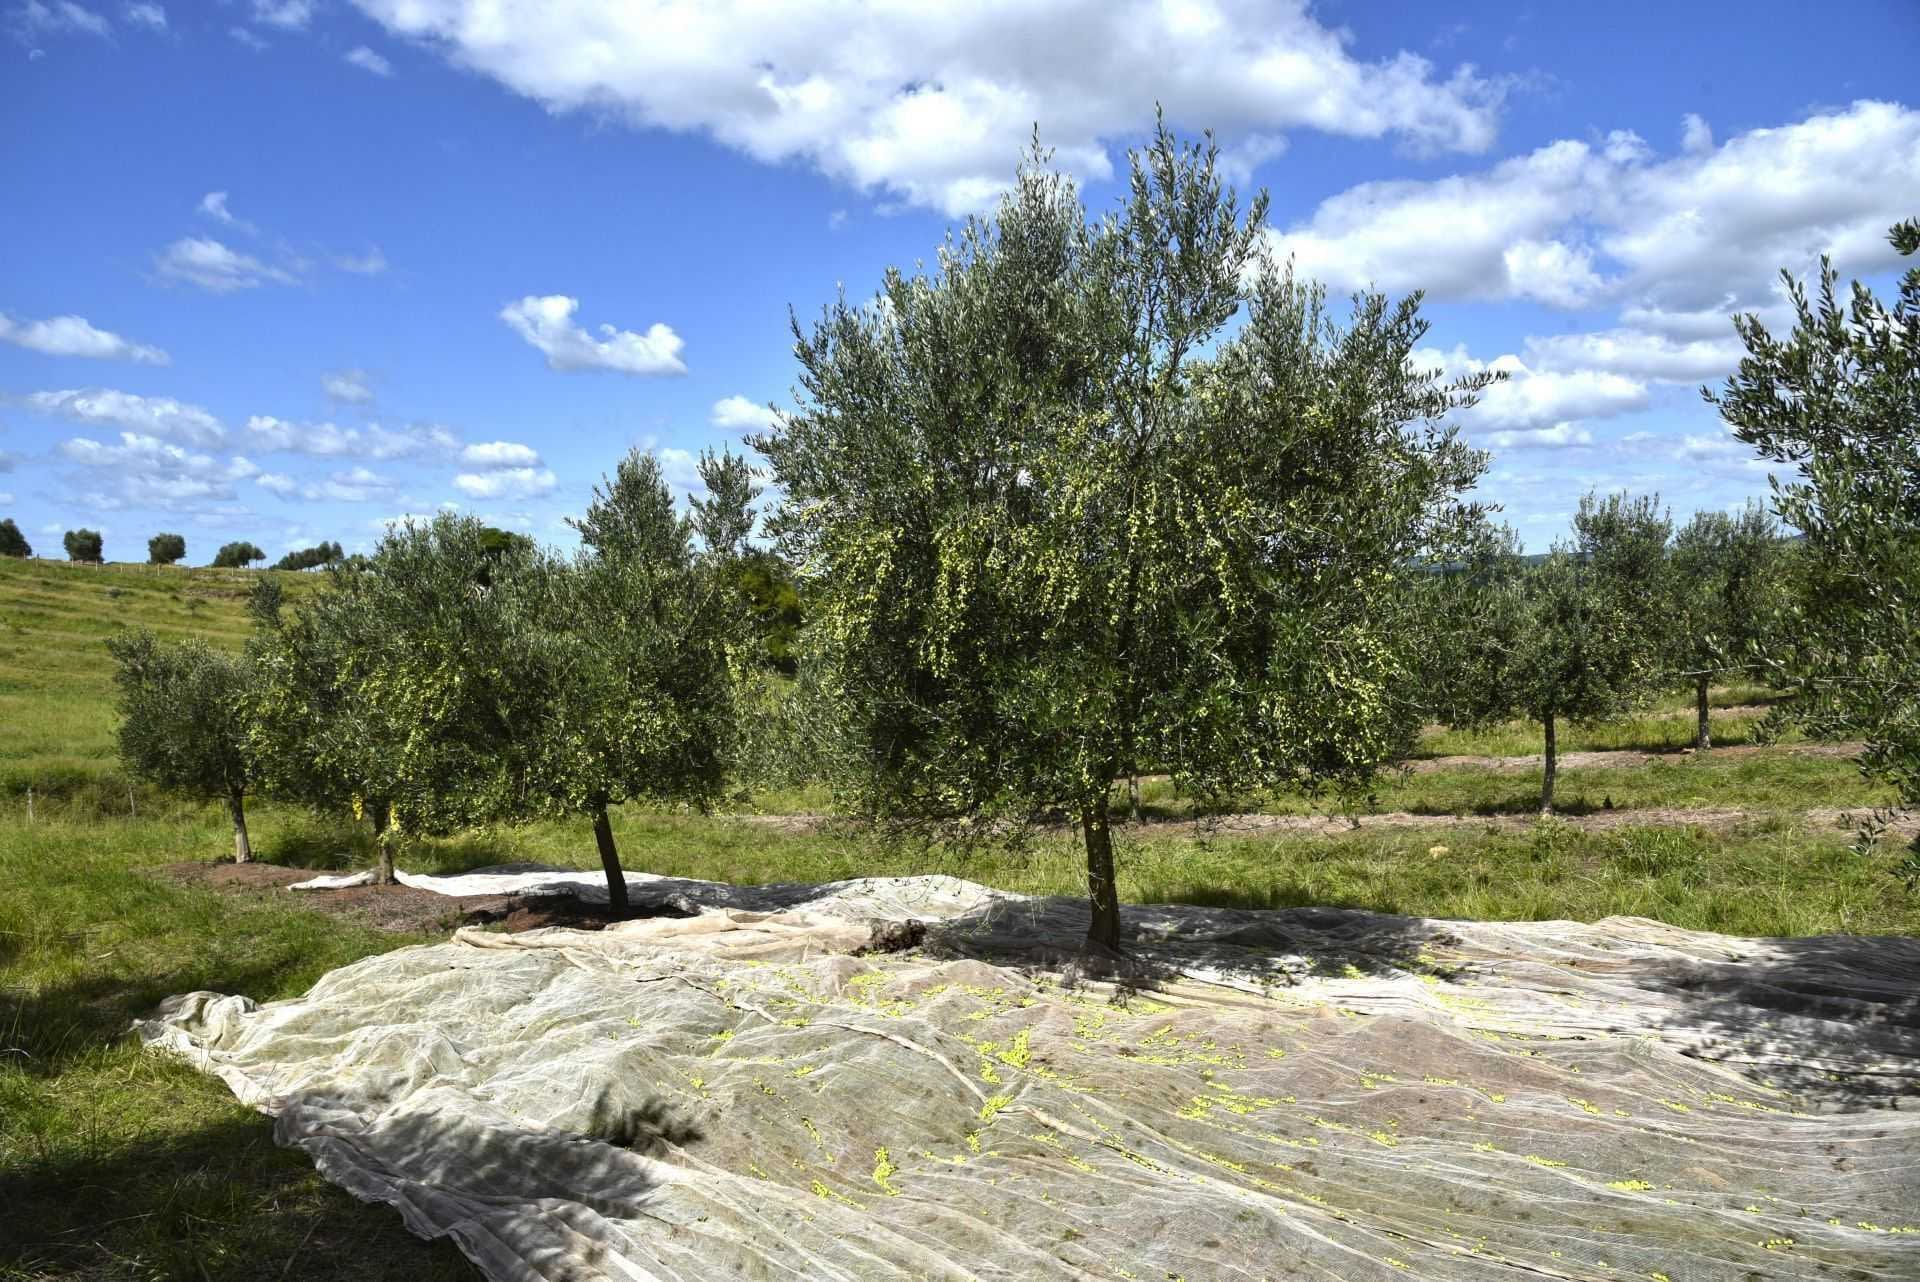 profiles-the-best-olive-oils-competitions-south-america-renewed-focus-on-quality-pays-off-for-brazilian-producers-at-2021-nyiooc-olive-oil-times